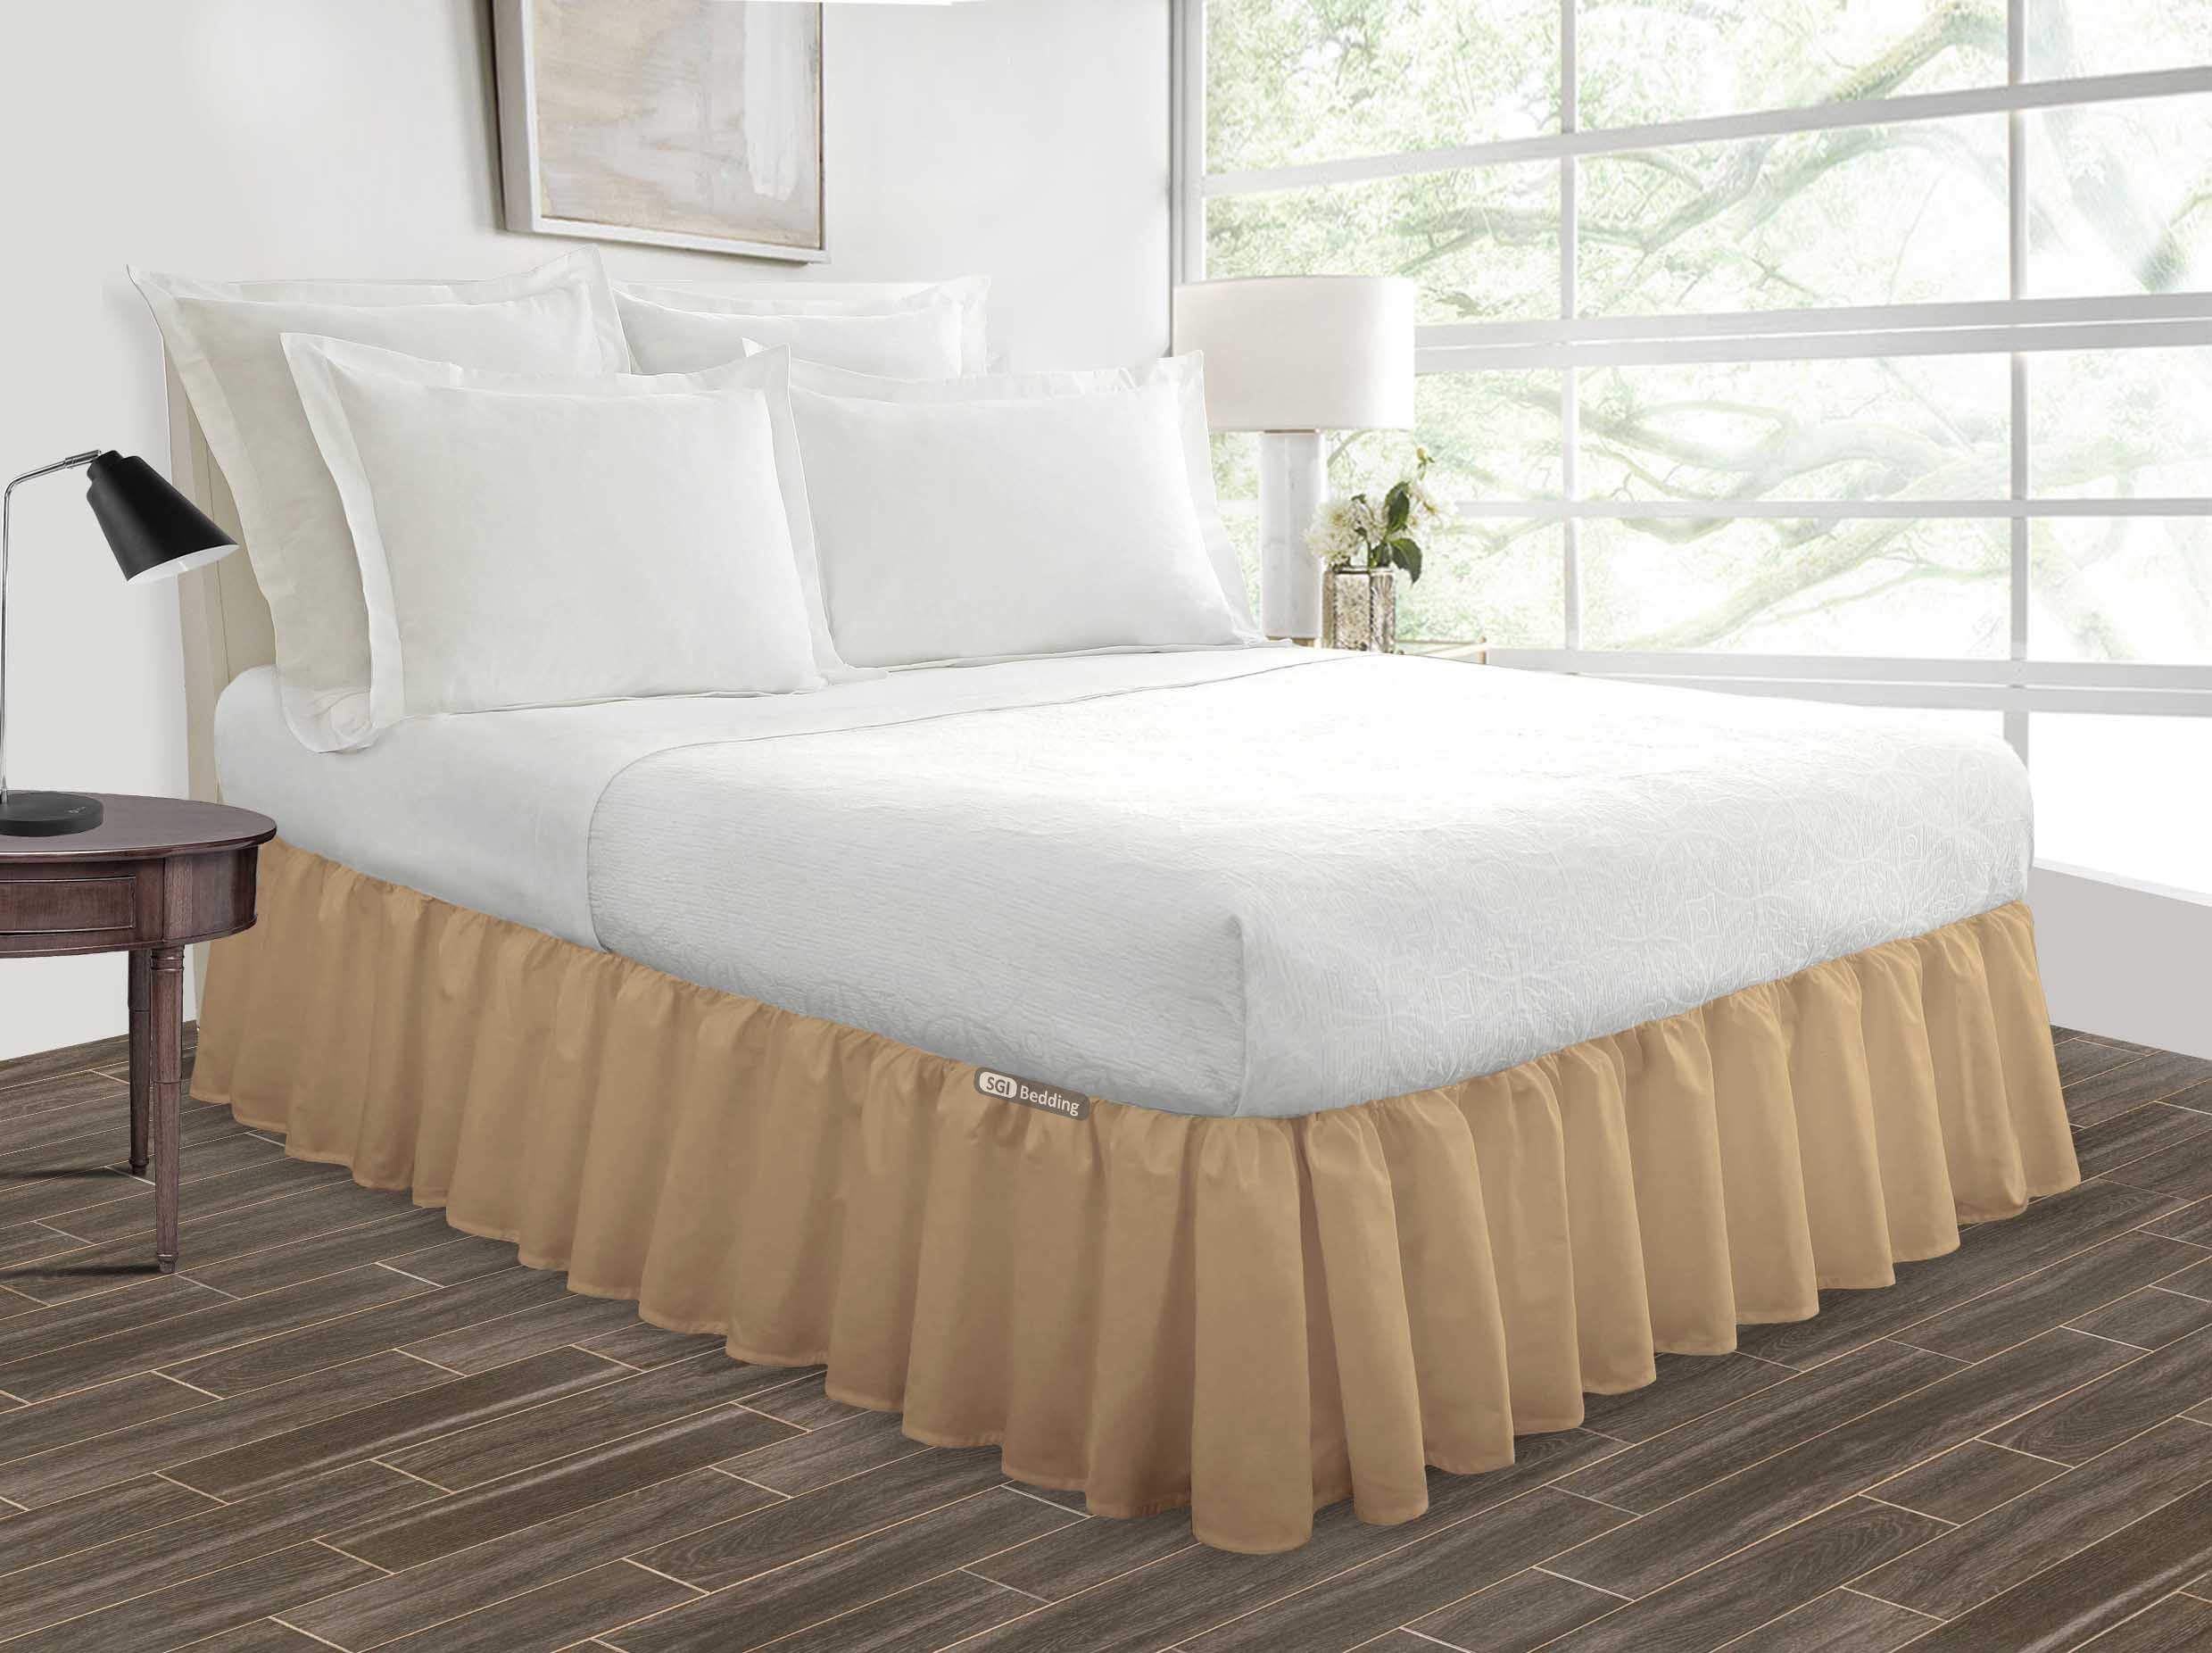 NEW MODERN SOLID DUST RUFFLE SPLIT CORNERS 1PC BED BEDDING PLEATED SKIRT C-KING 